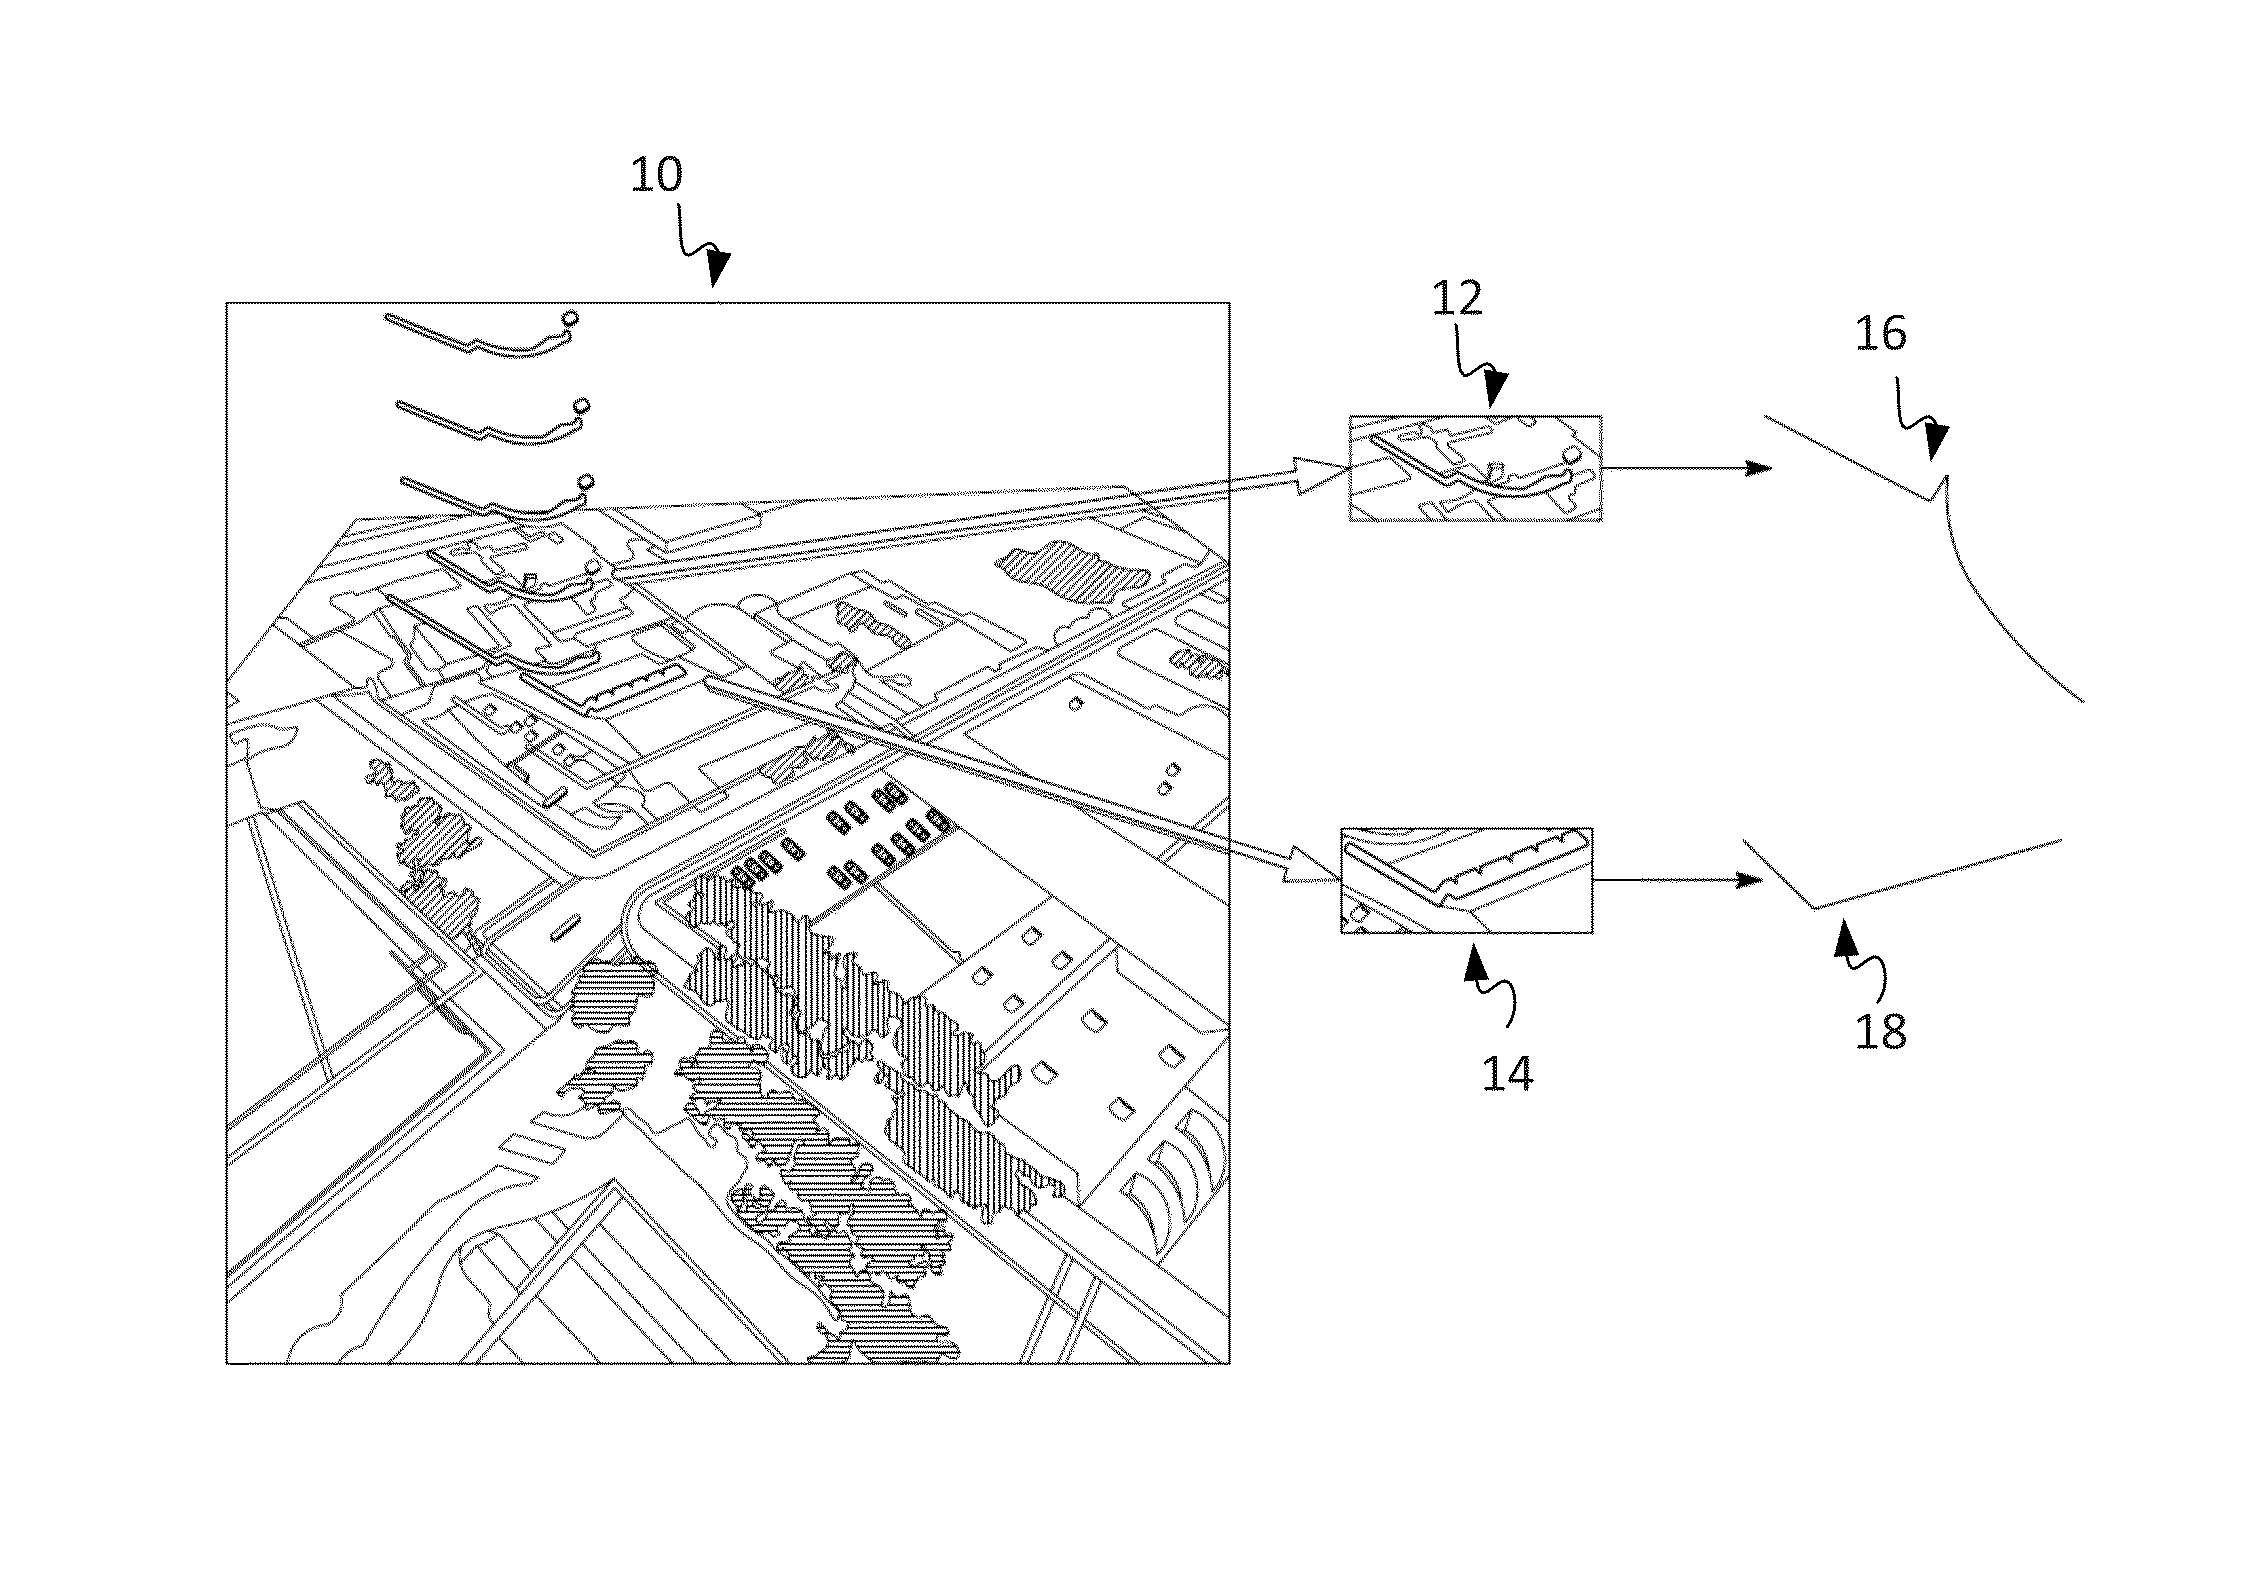 Selecting Feature Geometries for Localization of a Device